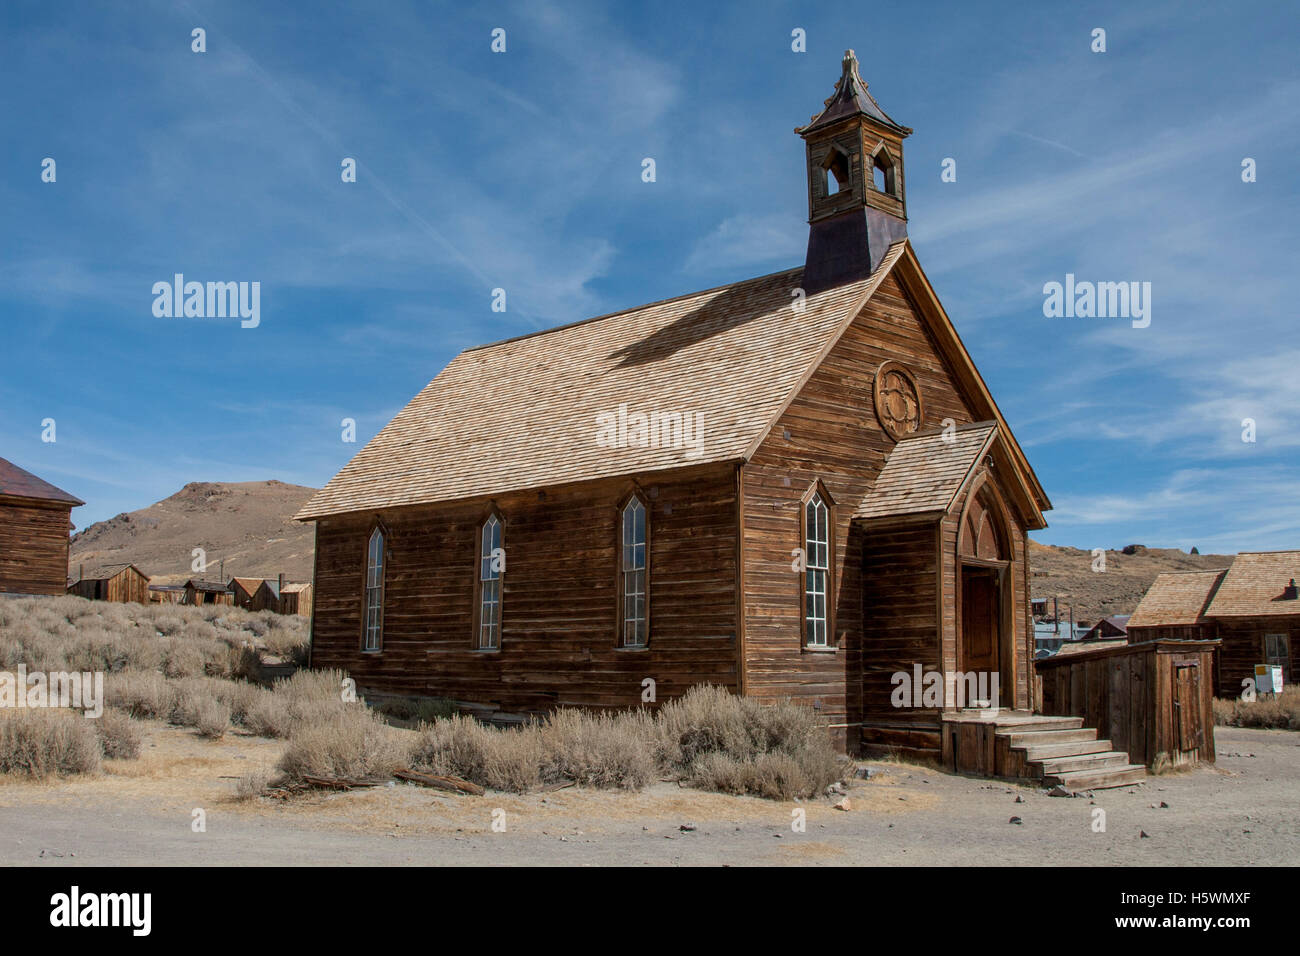 Bodie, California, a ghost town that was once a booming mining town. Stock Photo